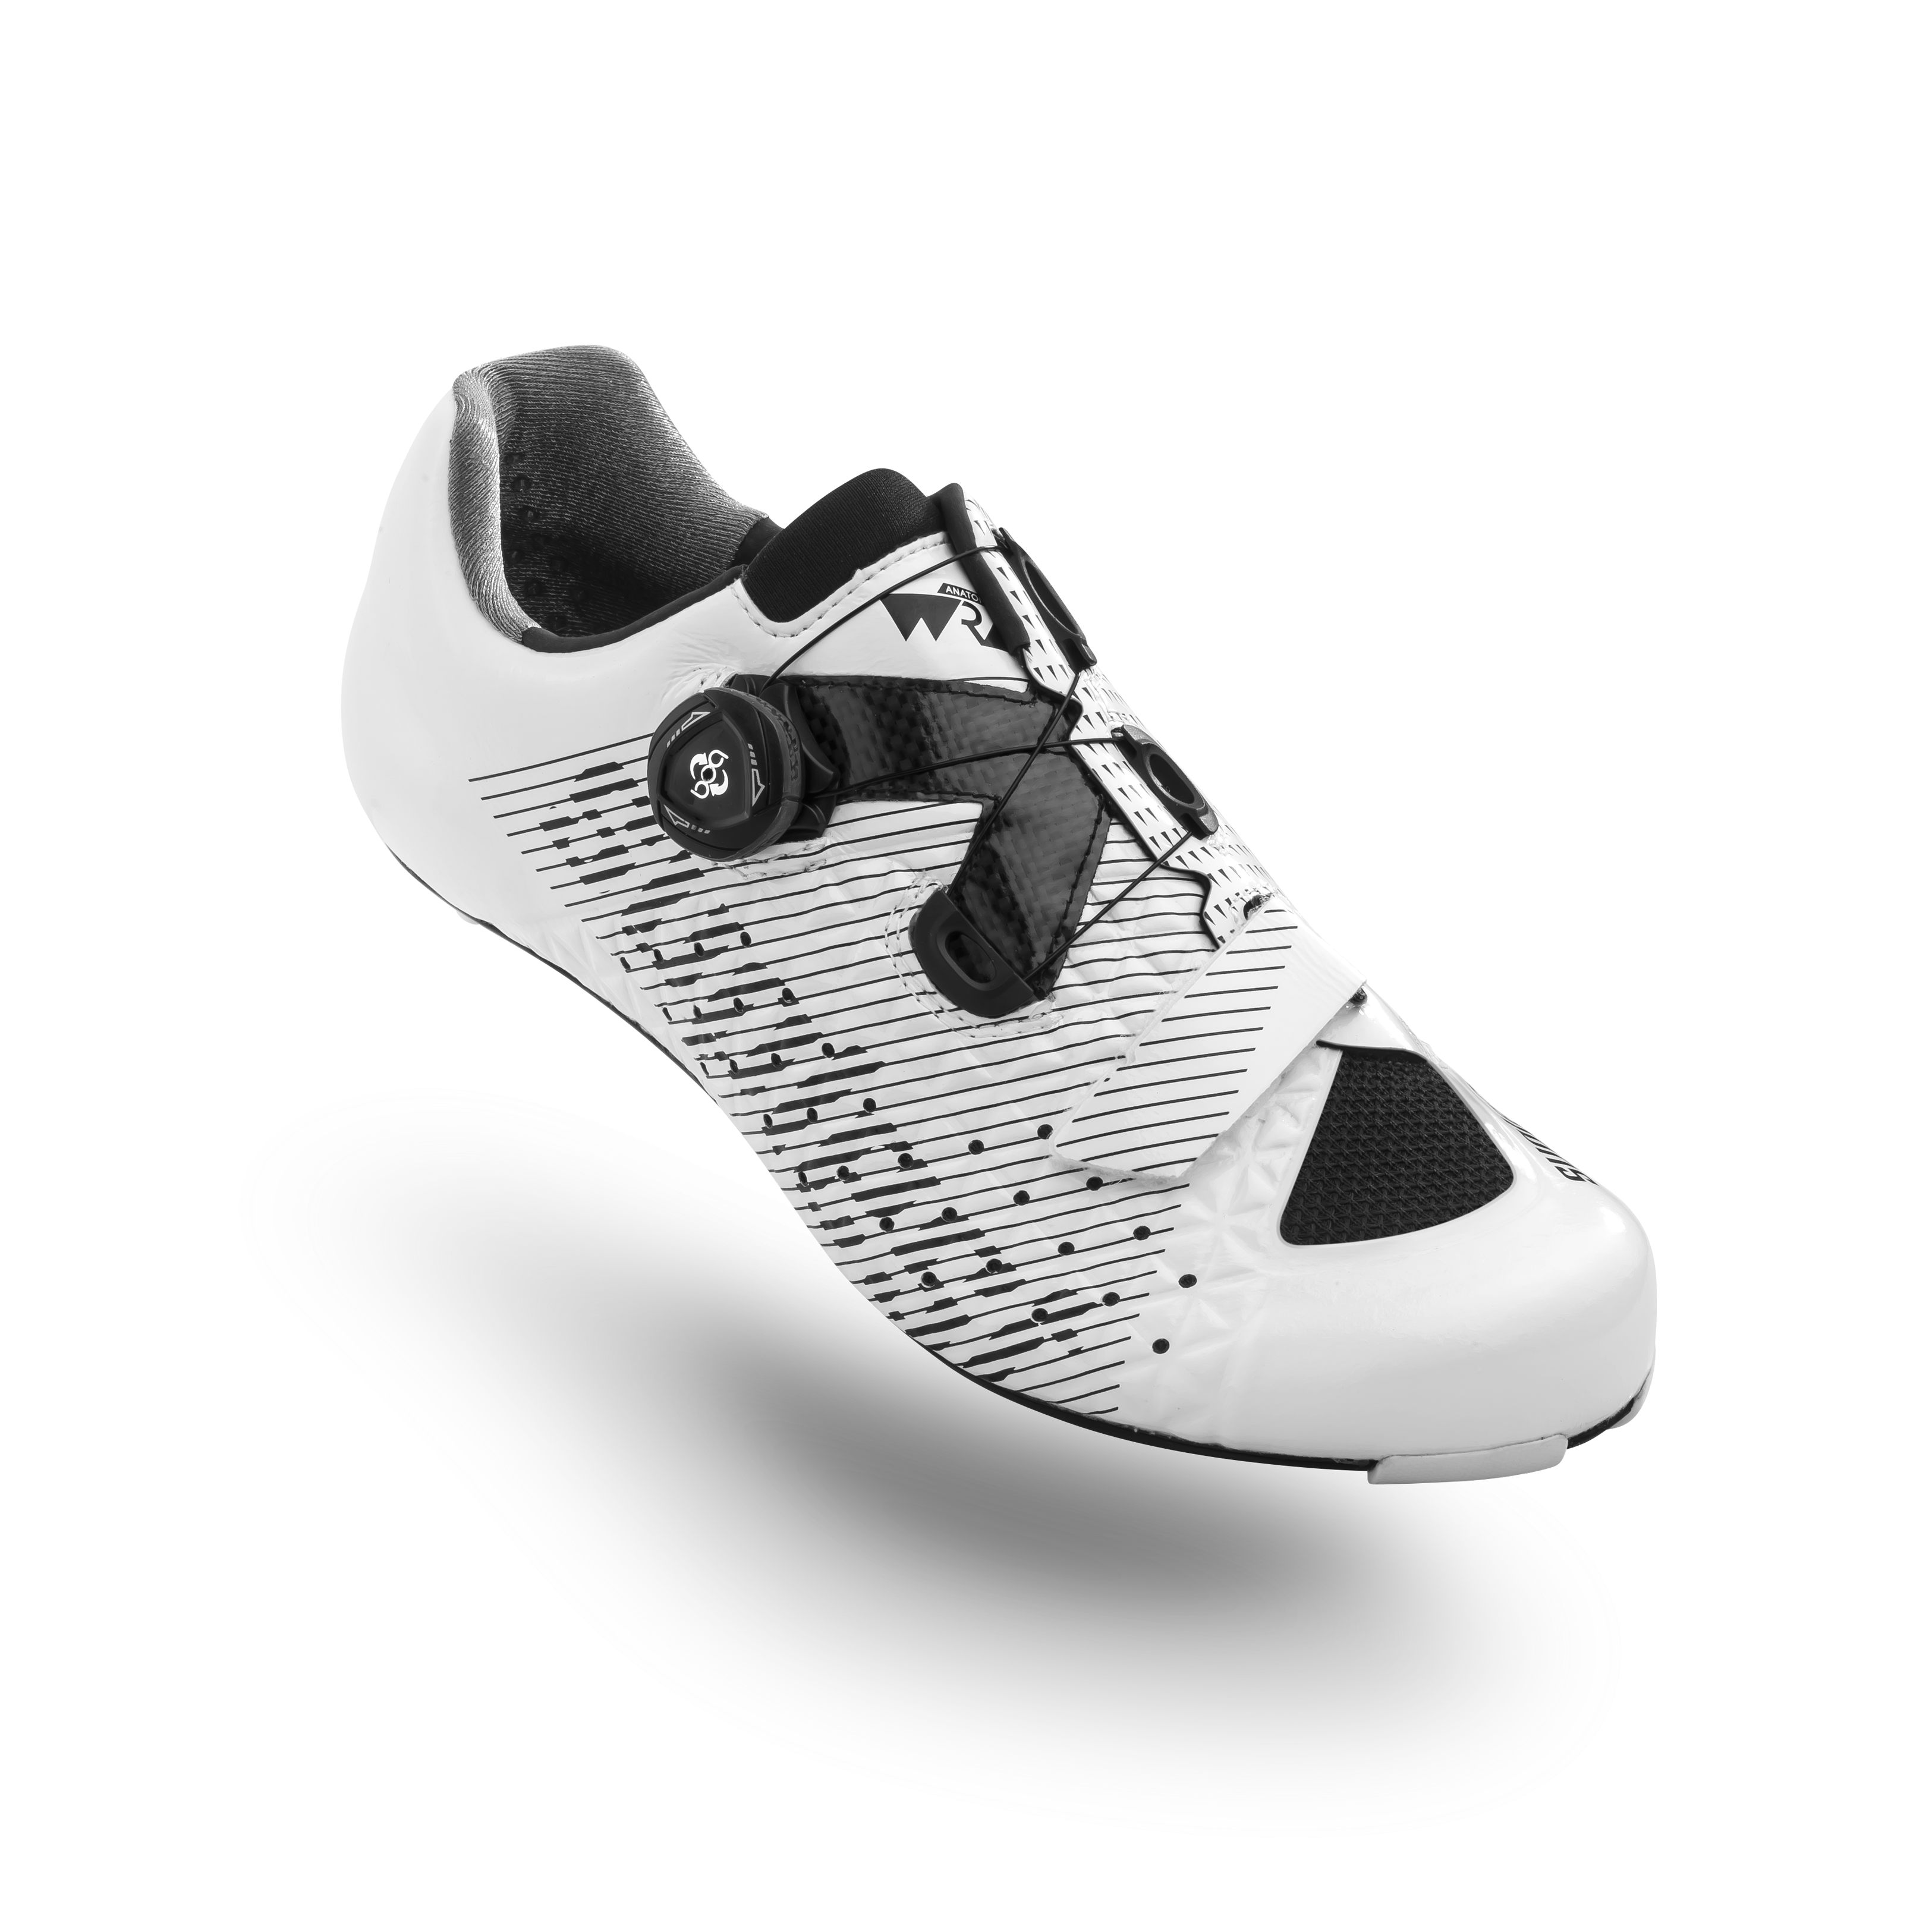 Suplest edge 3 performance chaussures route blanc